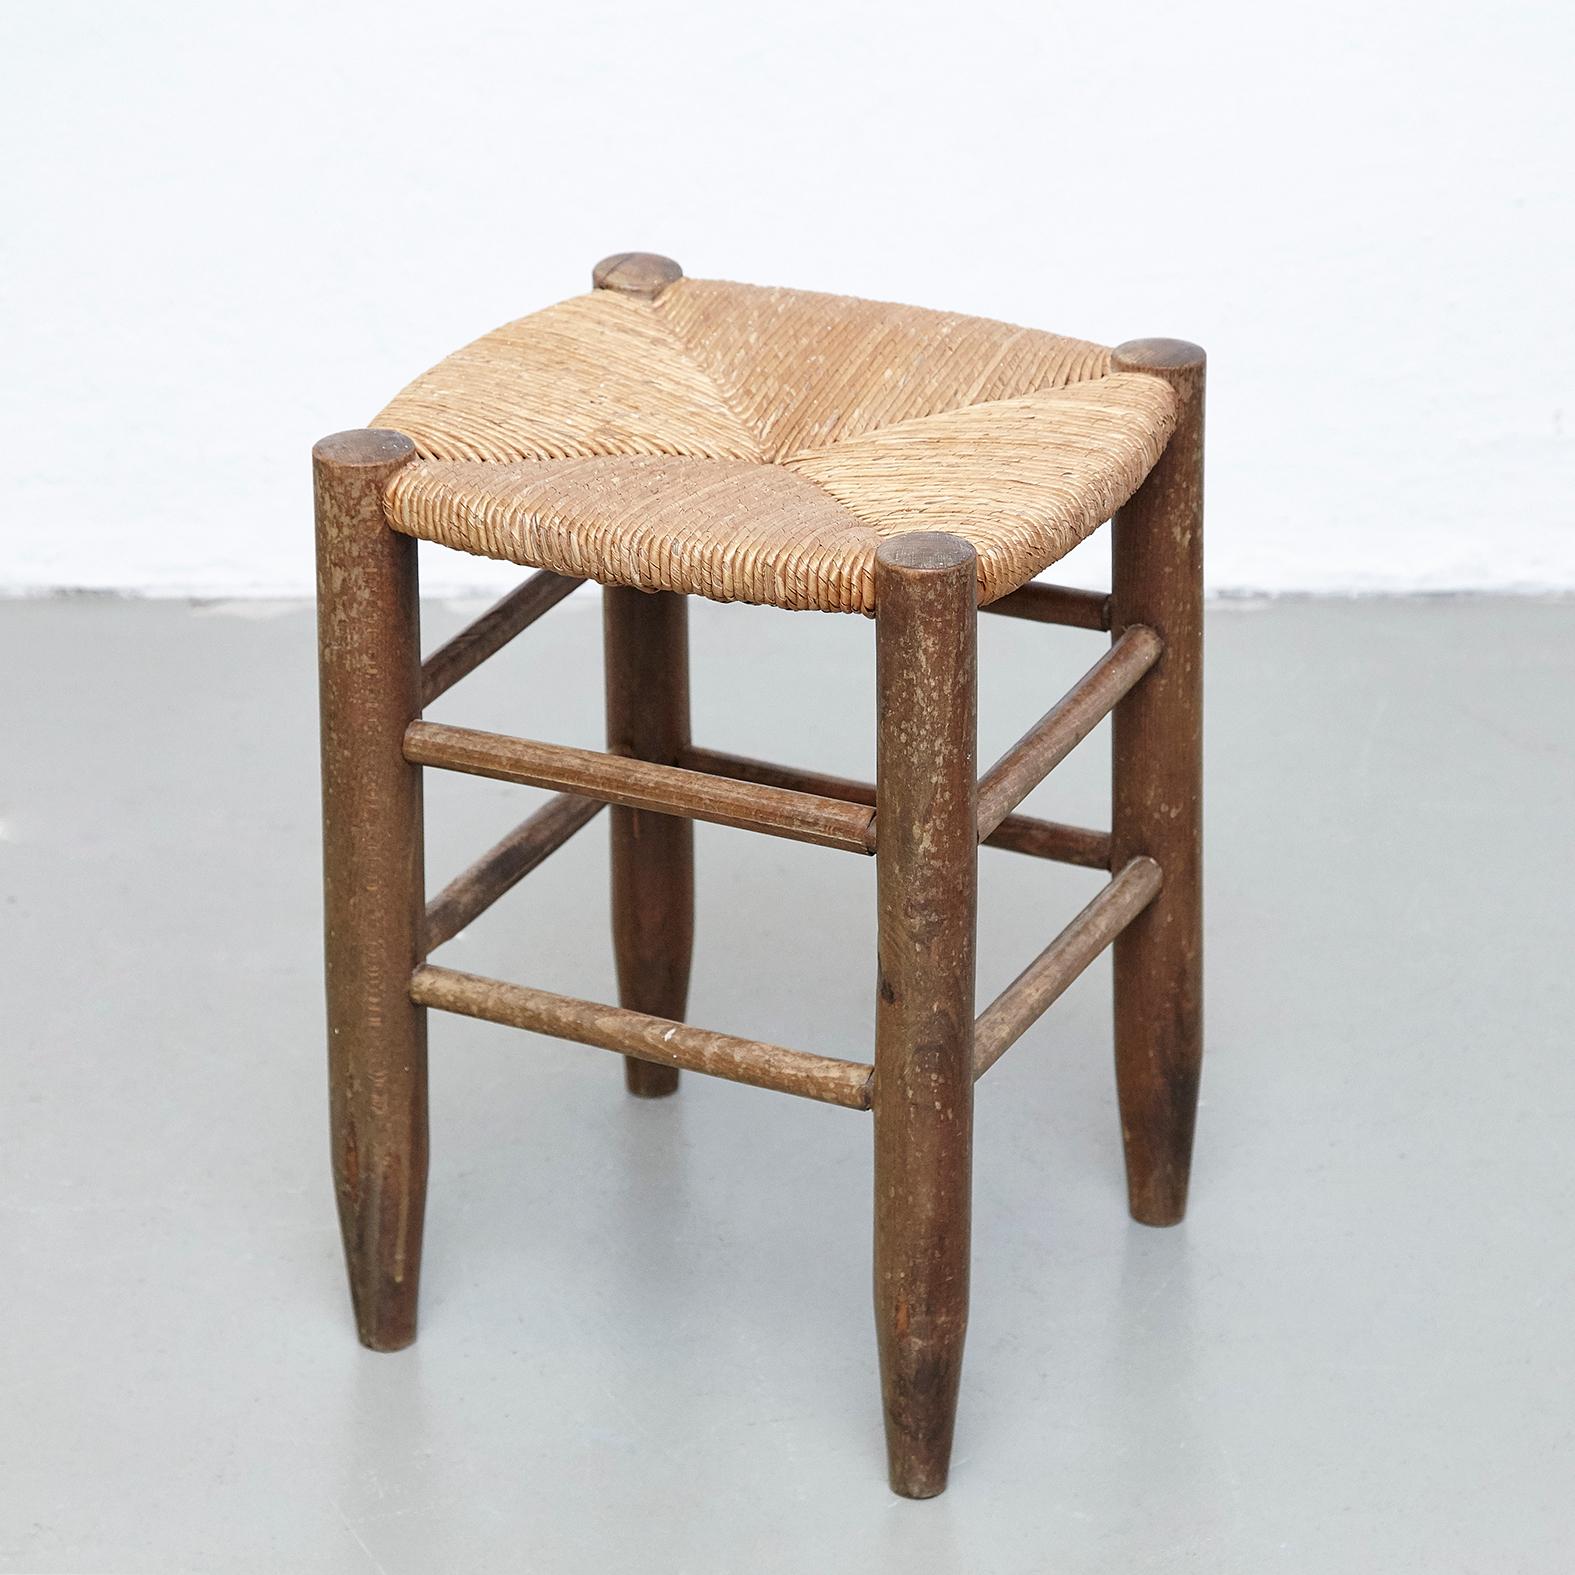 Pair of stools designed by Charlotte Perriand, circa 1950.
Manufactured in France.
Wood and rattan. 

In original condition, with minor wear consistent with age and use, preserving a beautiful patina.

Charlotte Perriand (1903-1999) She was